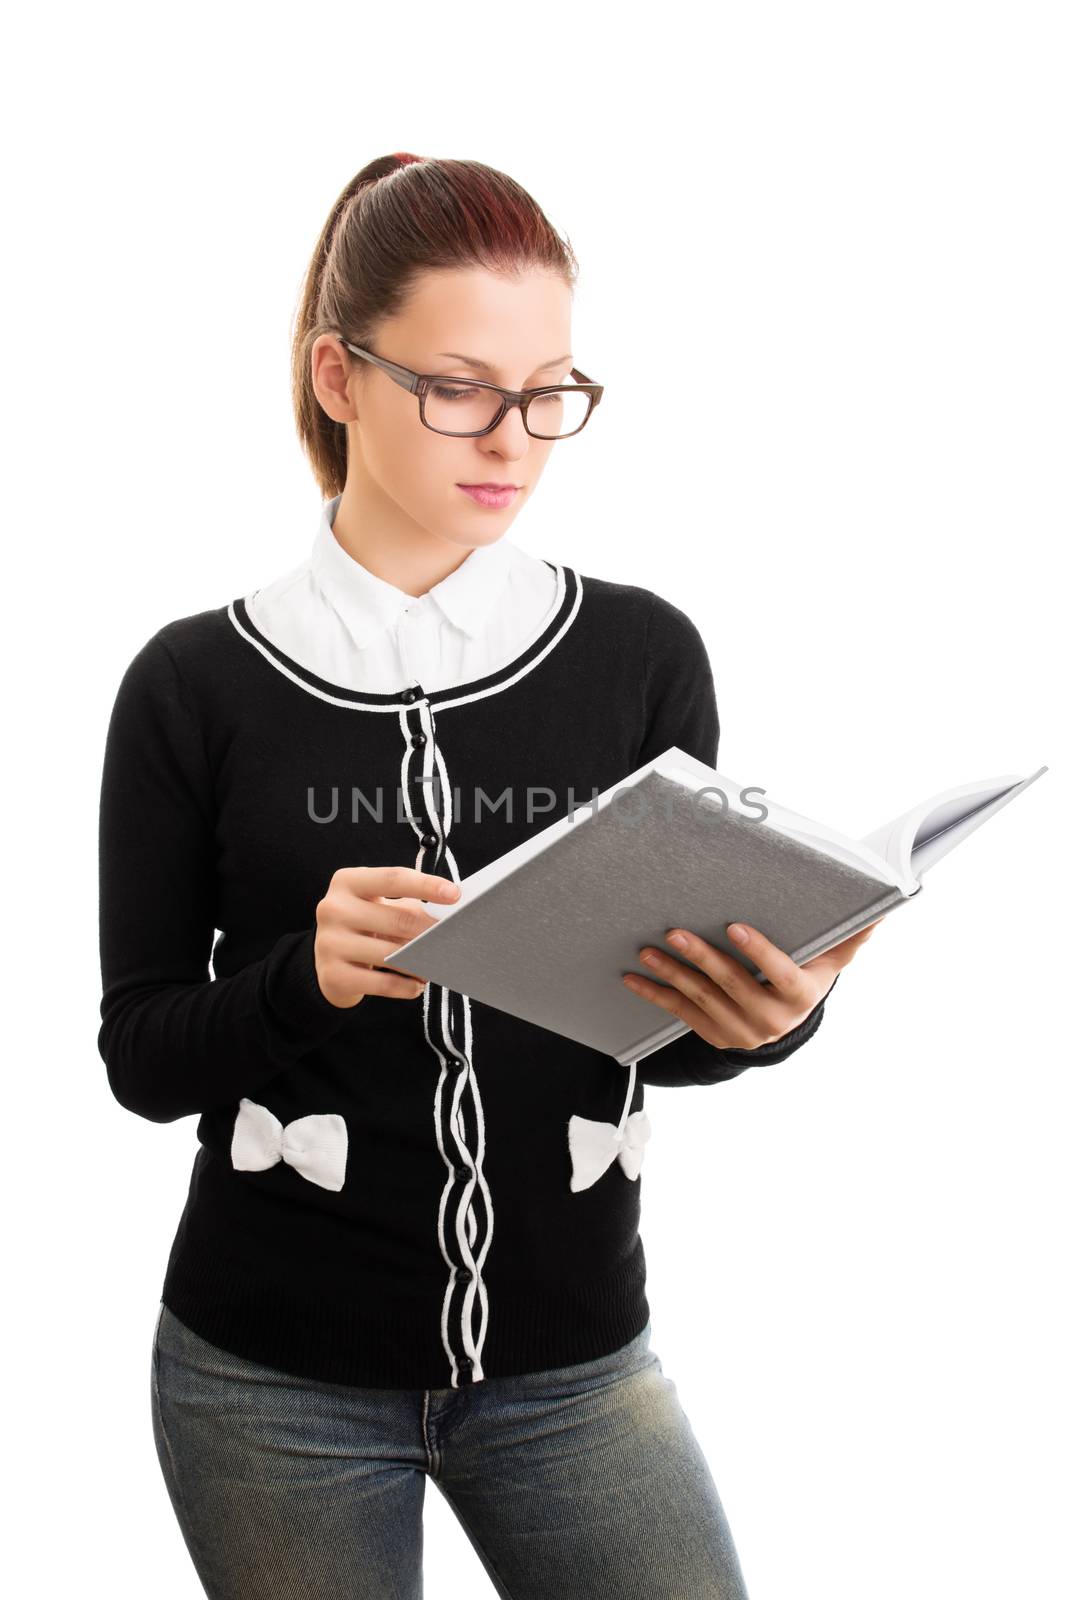 Young girl wearing glasses and going through her notes by Mendelex